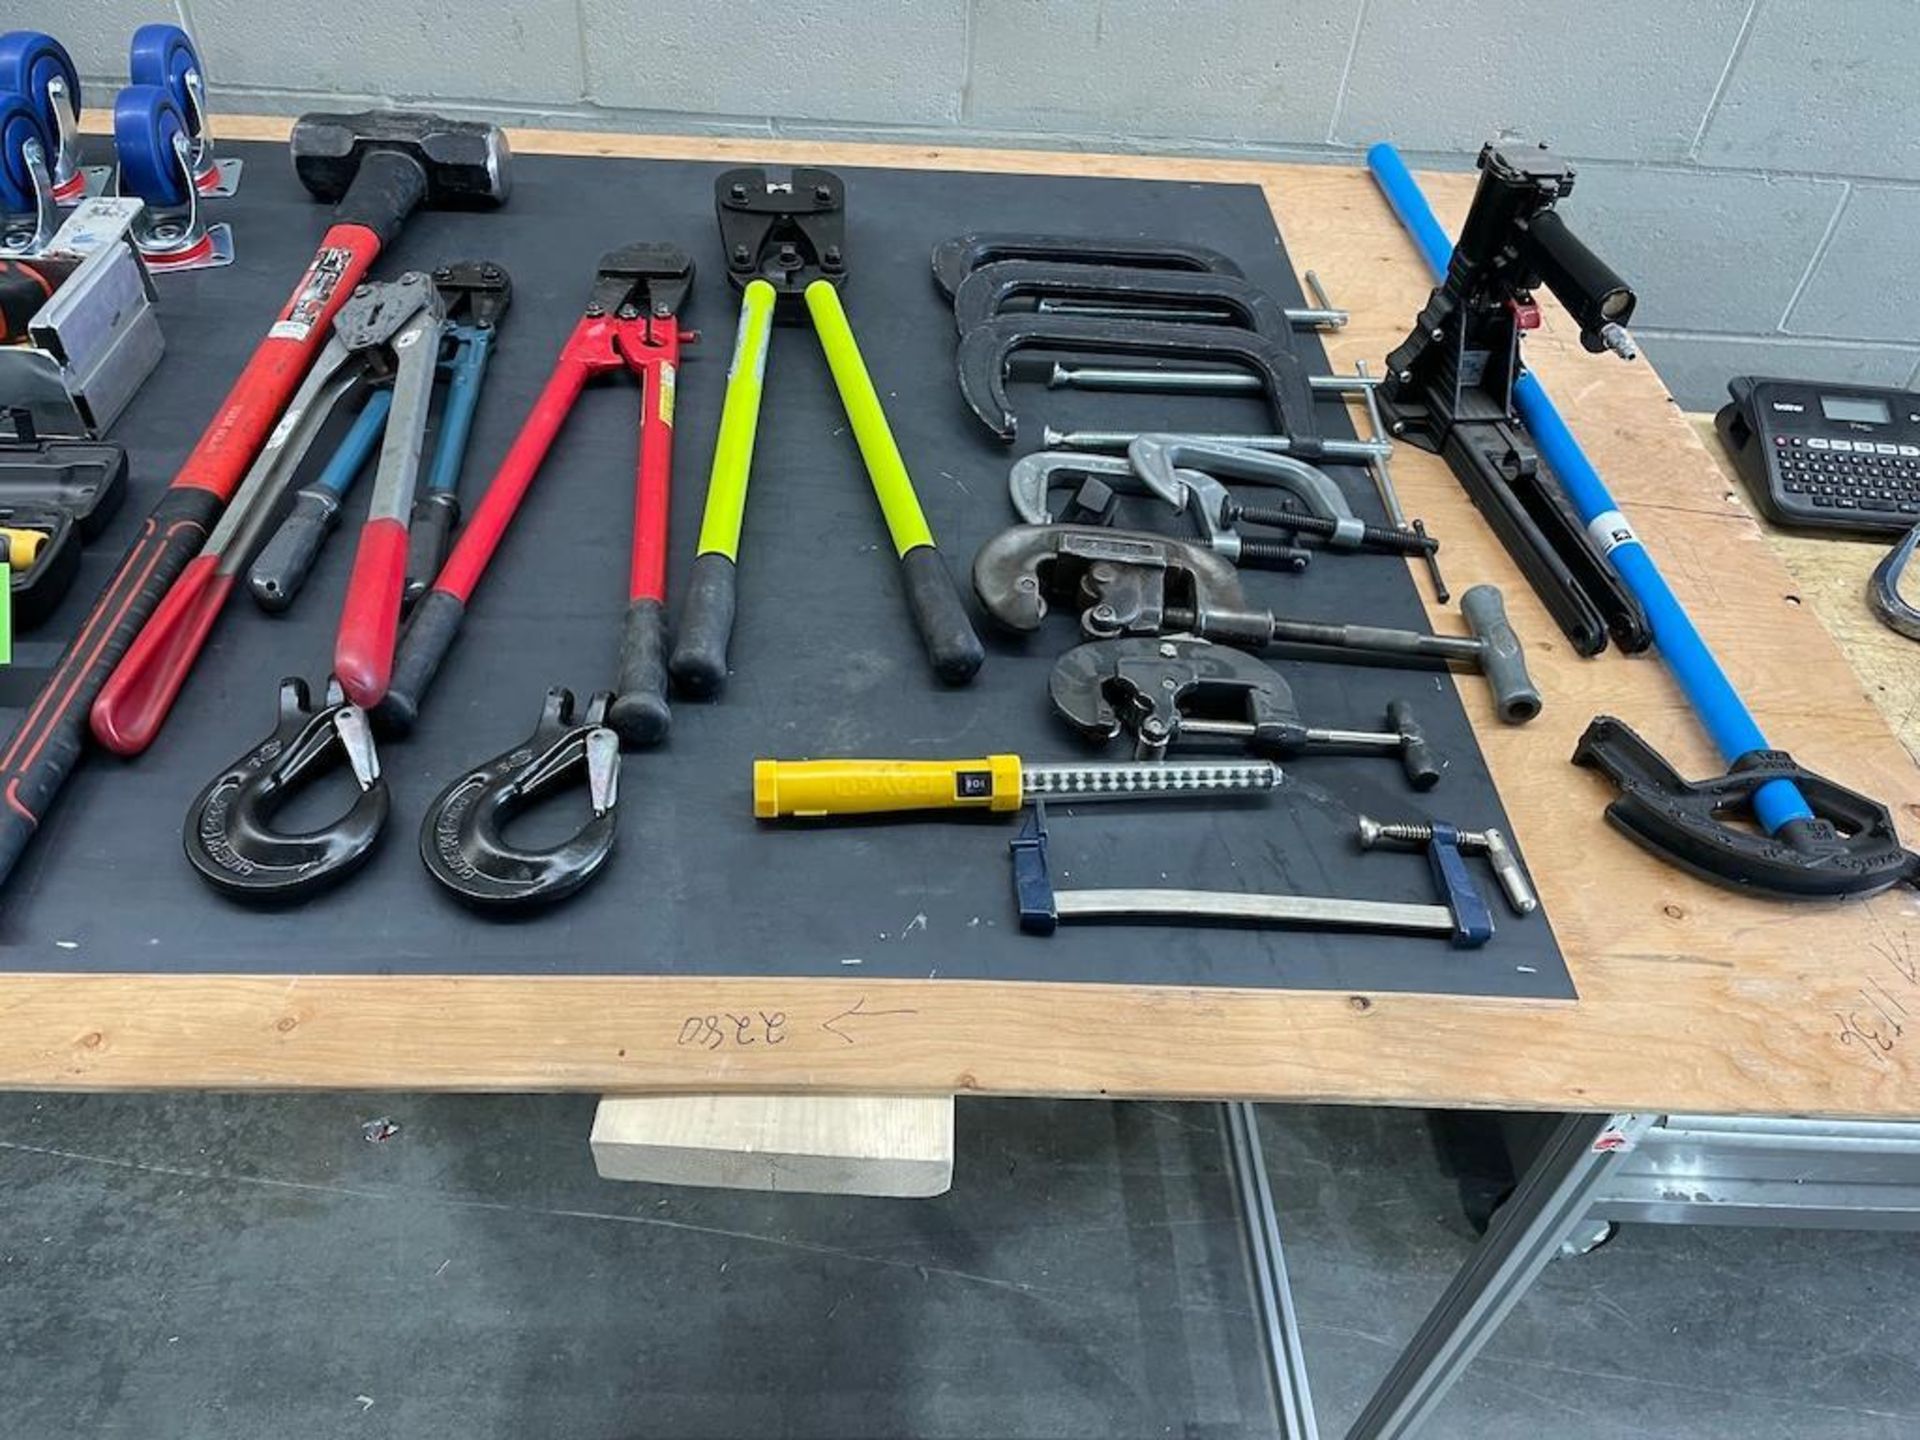 LOT: ASSORTED TOOLS, TORQUE WRENCHES, NAIL GUN, CASTERS [TROIS RIVIERES] *PLEASE NOTE, EXCLUSIVE RIG - Image 3 of 3